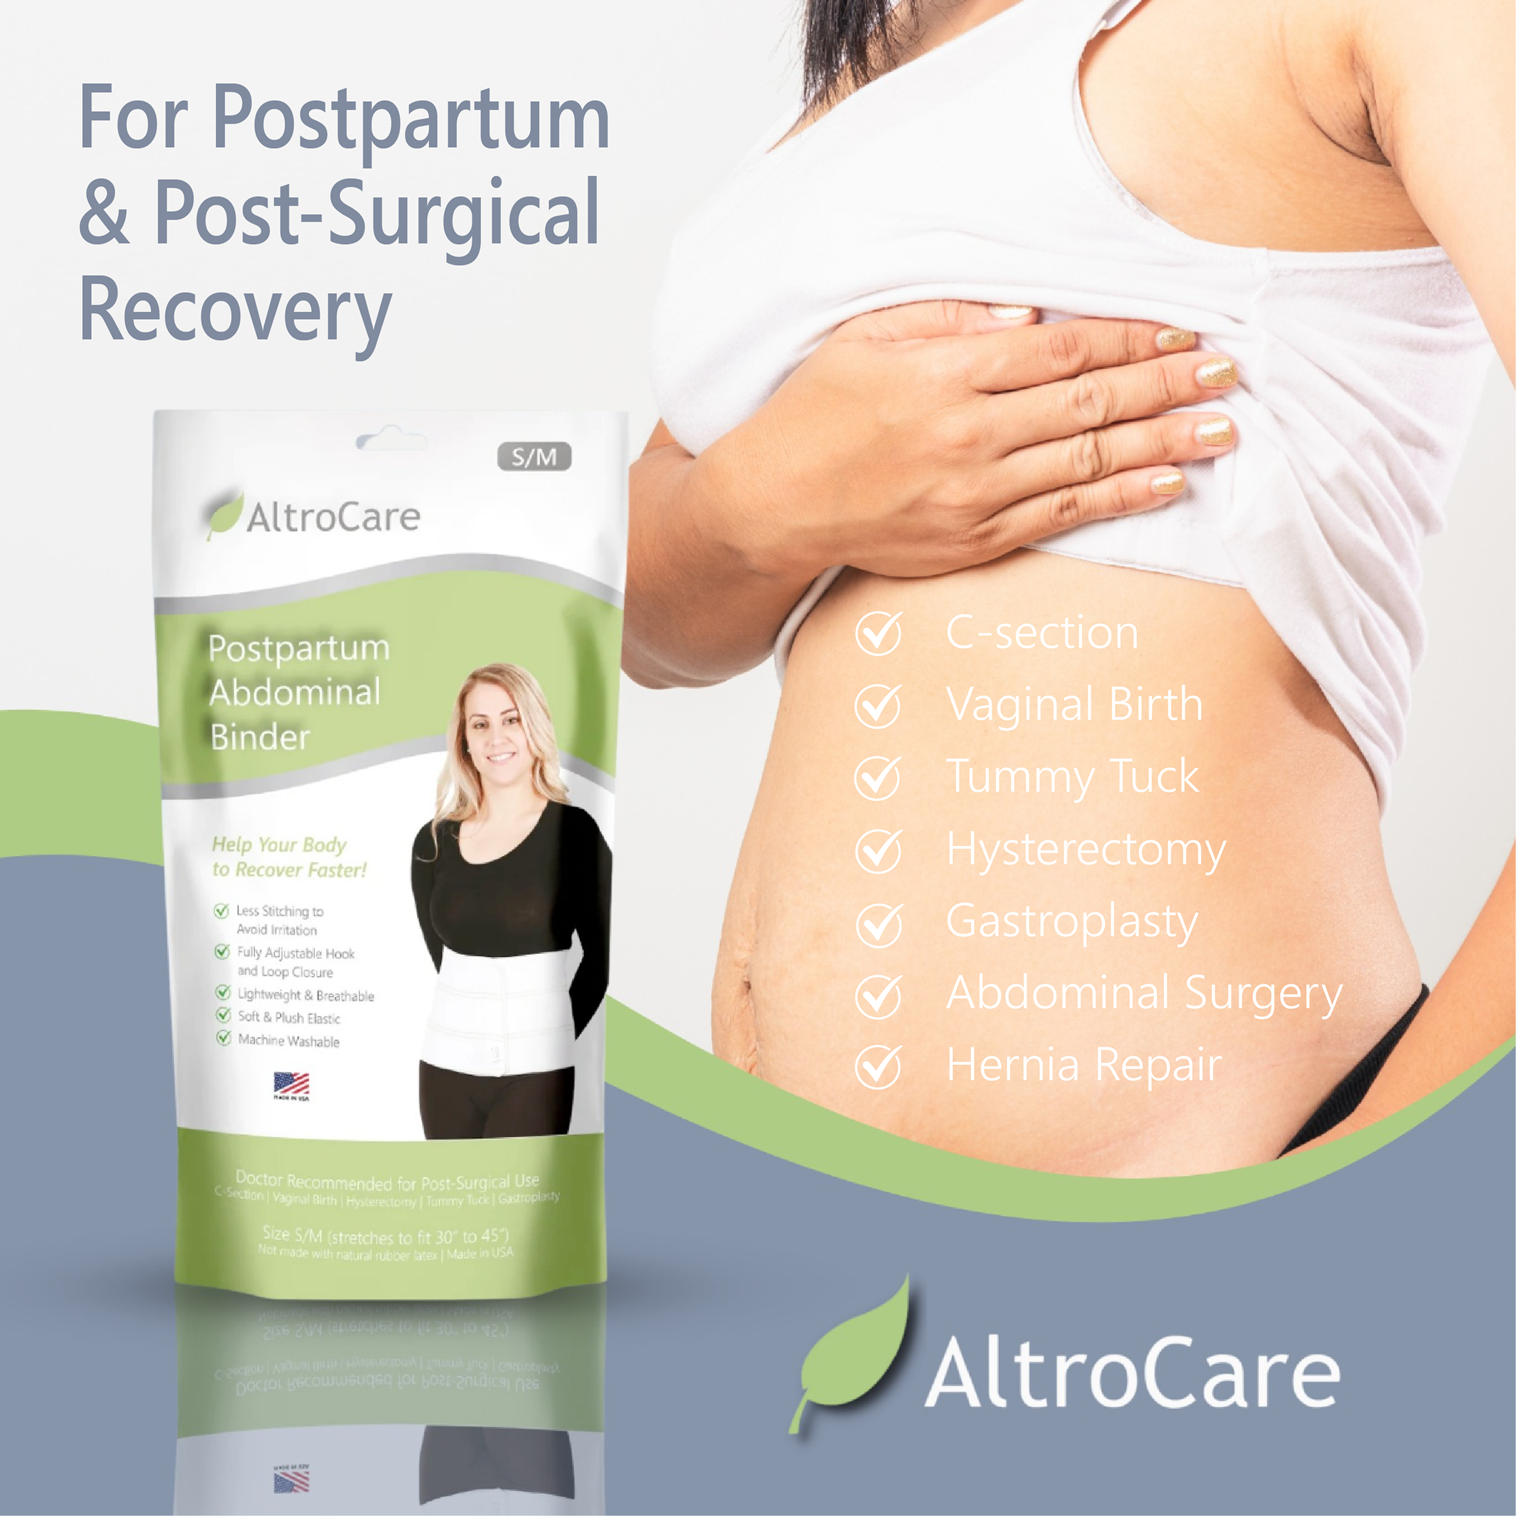  AltroCare 5-Pack, Disposable, Postpartum and